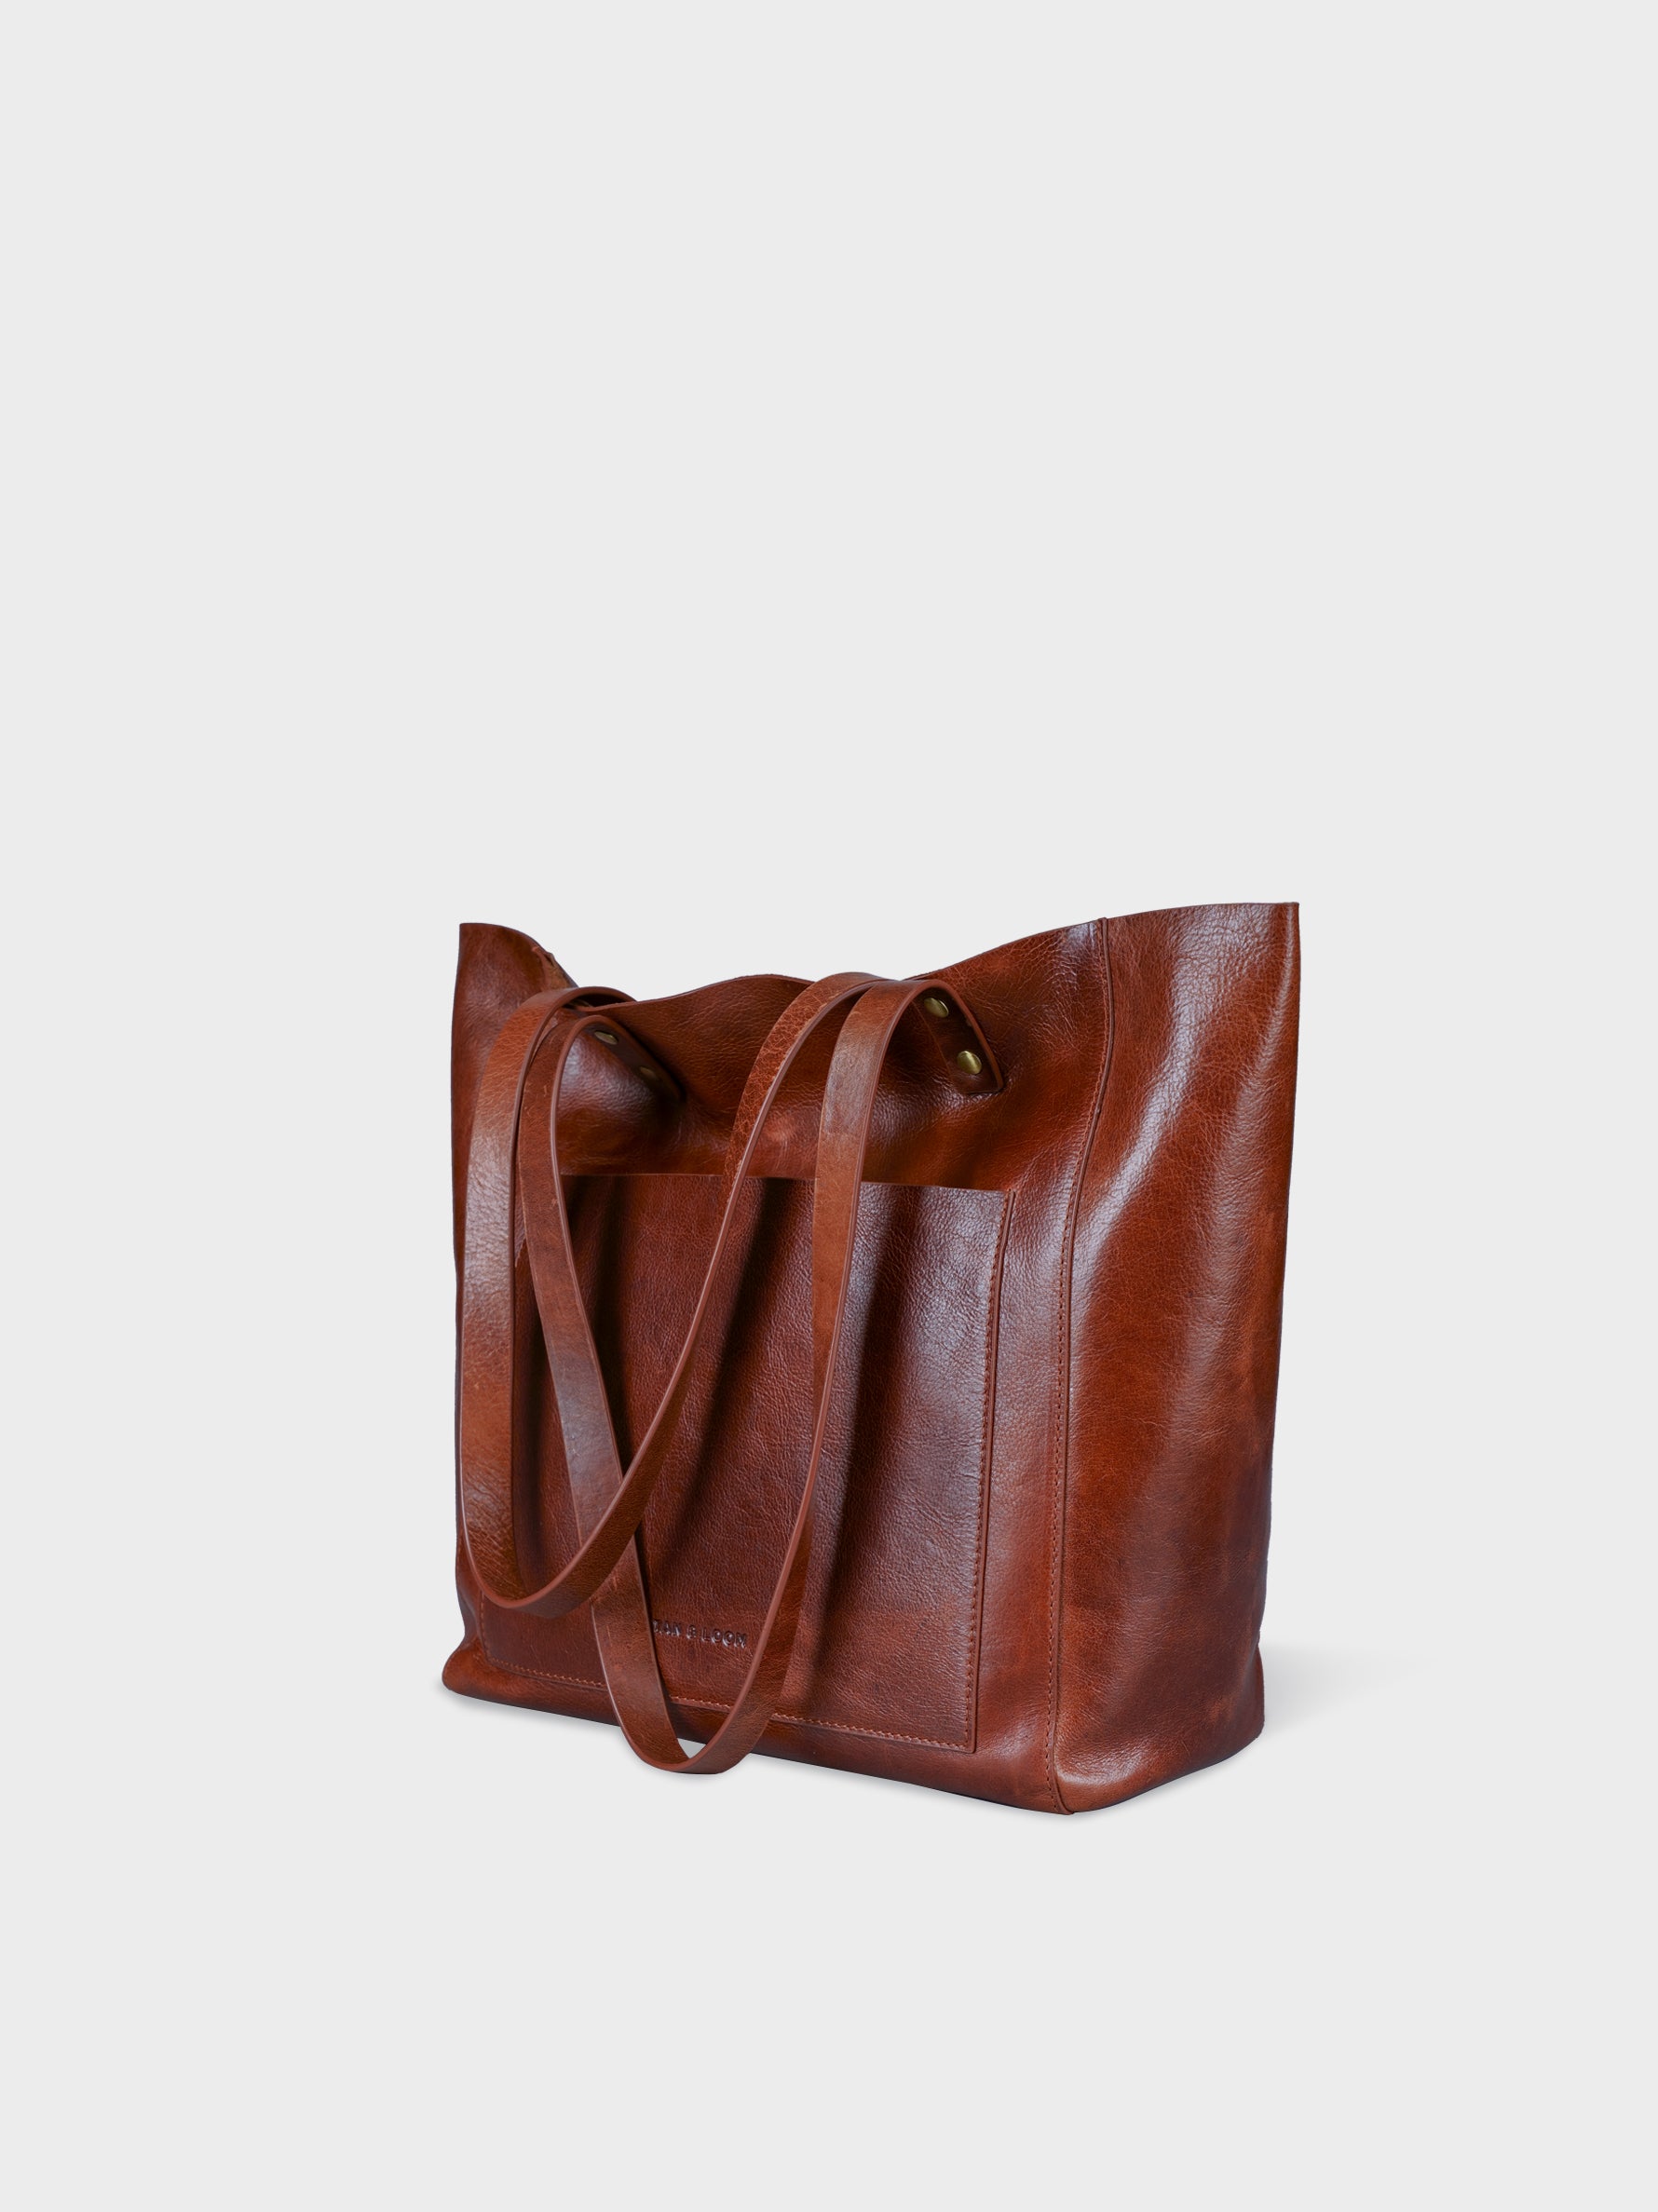 Handcrafted Genuine Vegetable Tanned Leather Old Fashioned Tote Regular Vintage Brown for Women Tan & Loom